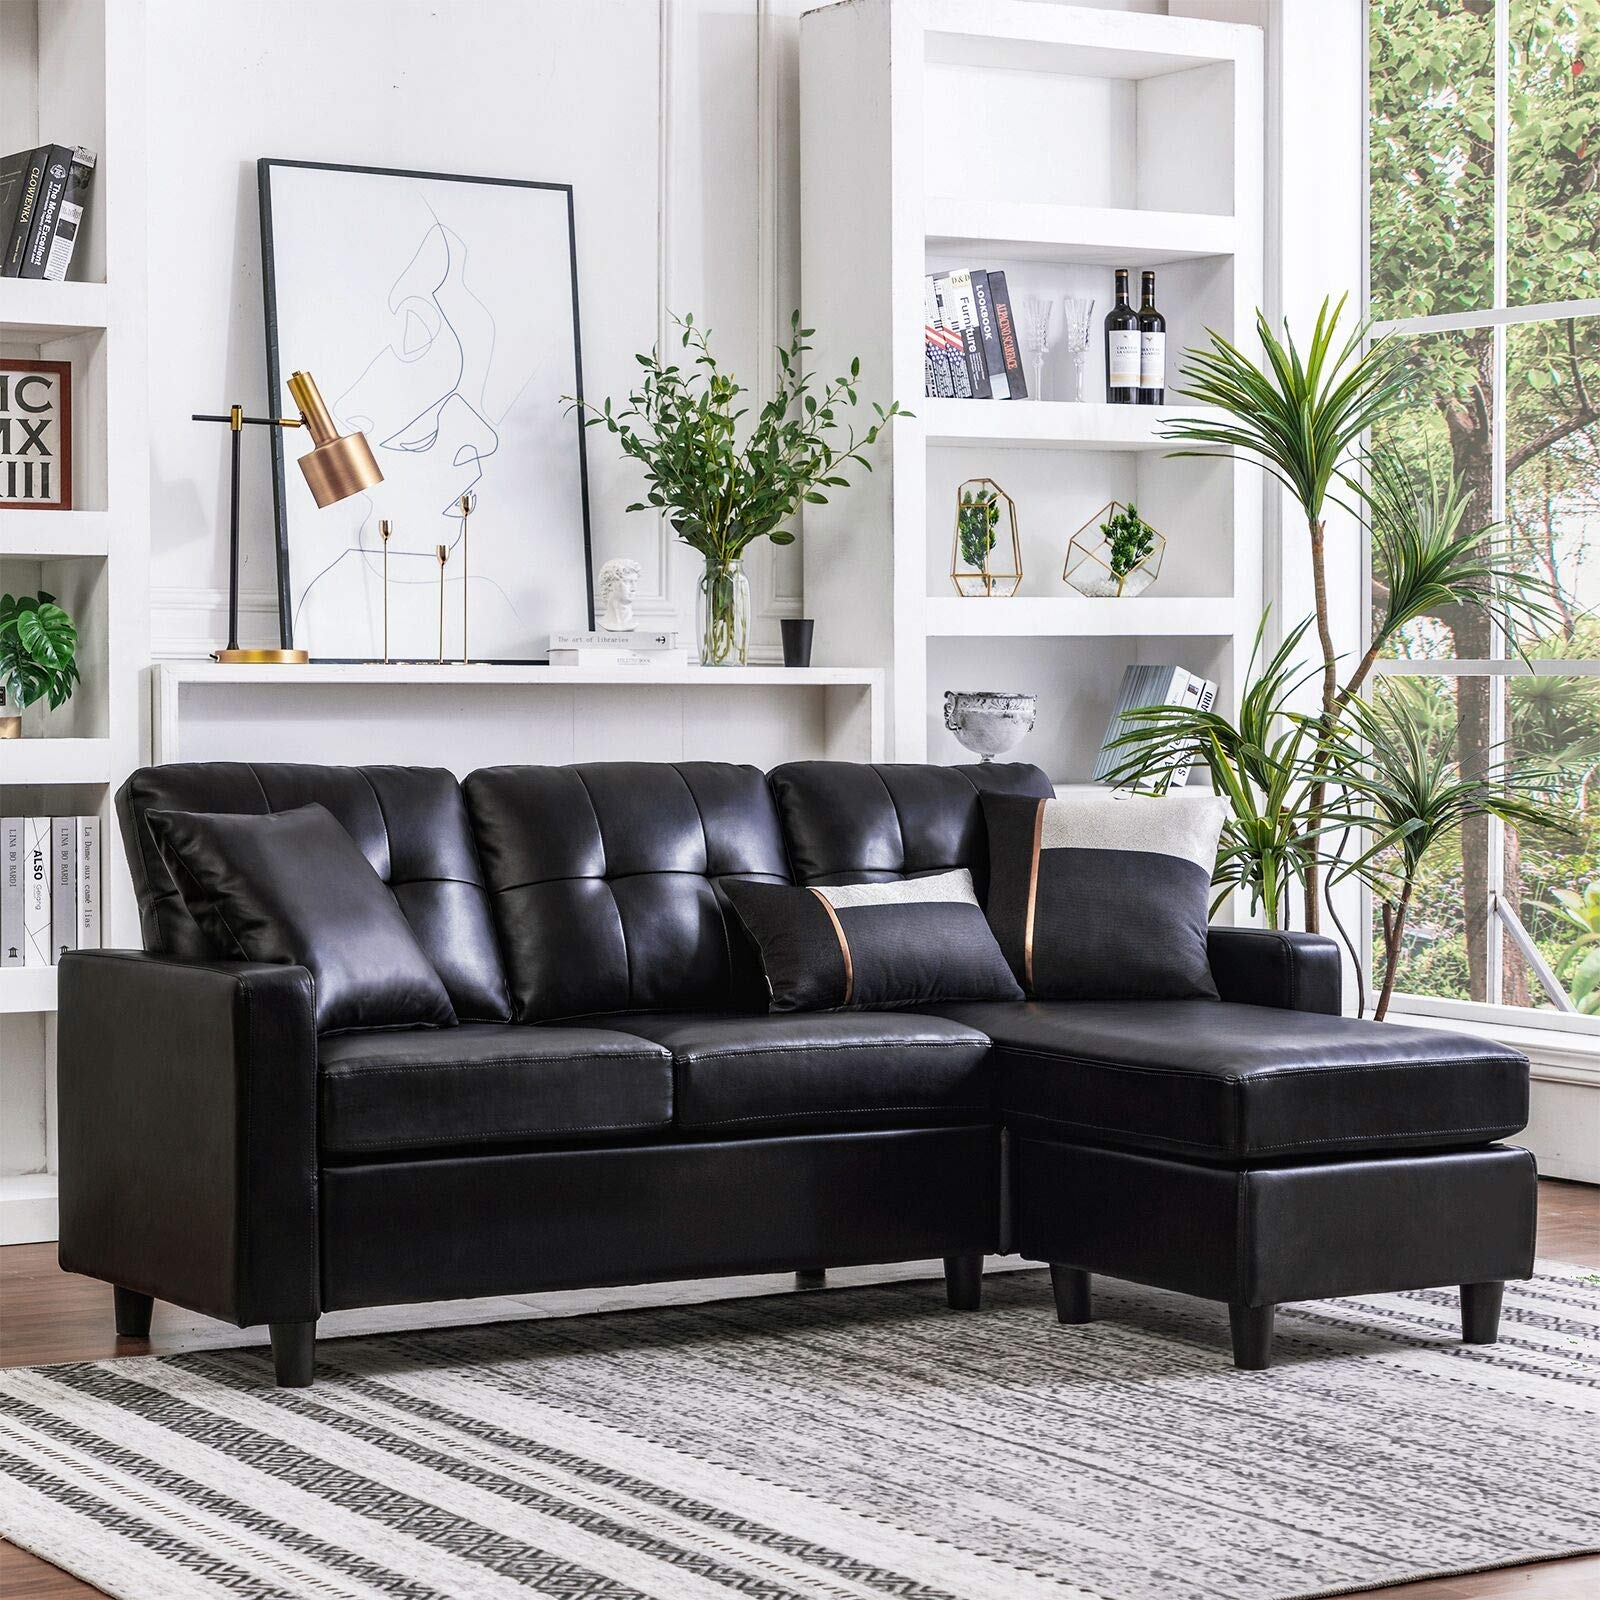 Small Couches For Spaces You Ll, Sectional Leather Sofas For Small Spaces